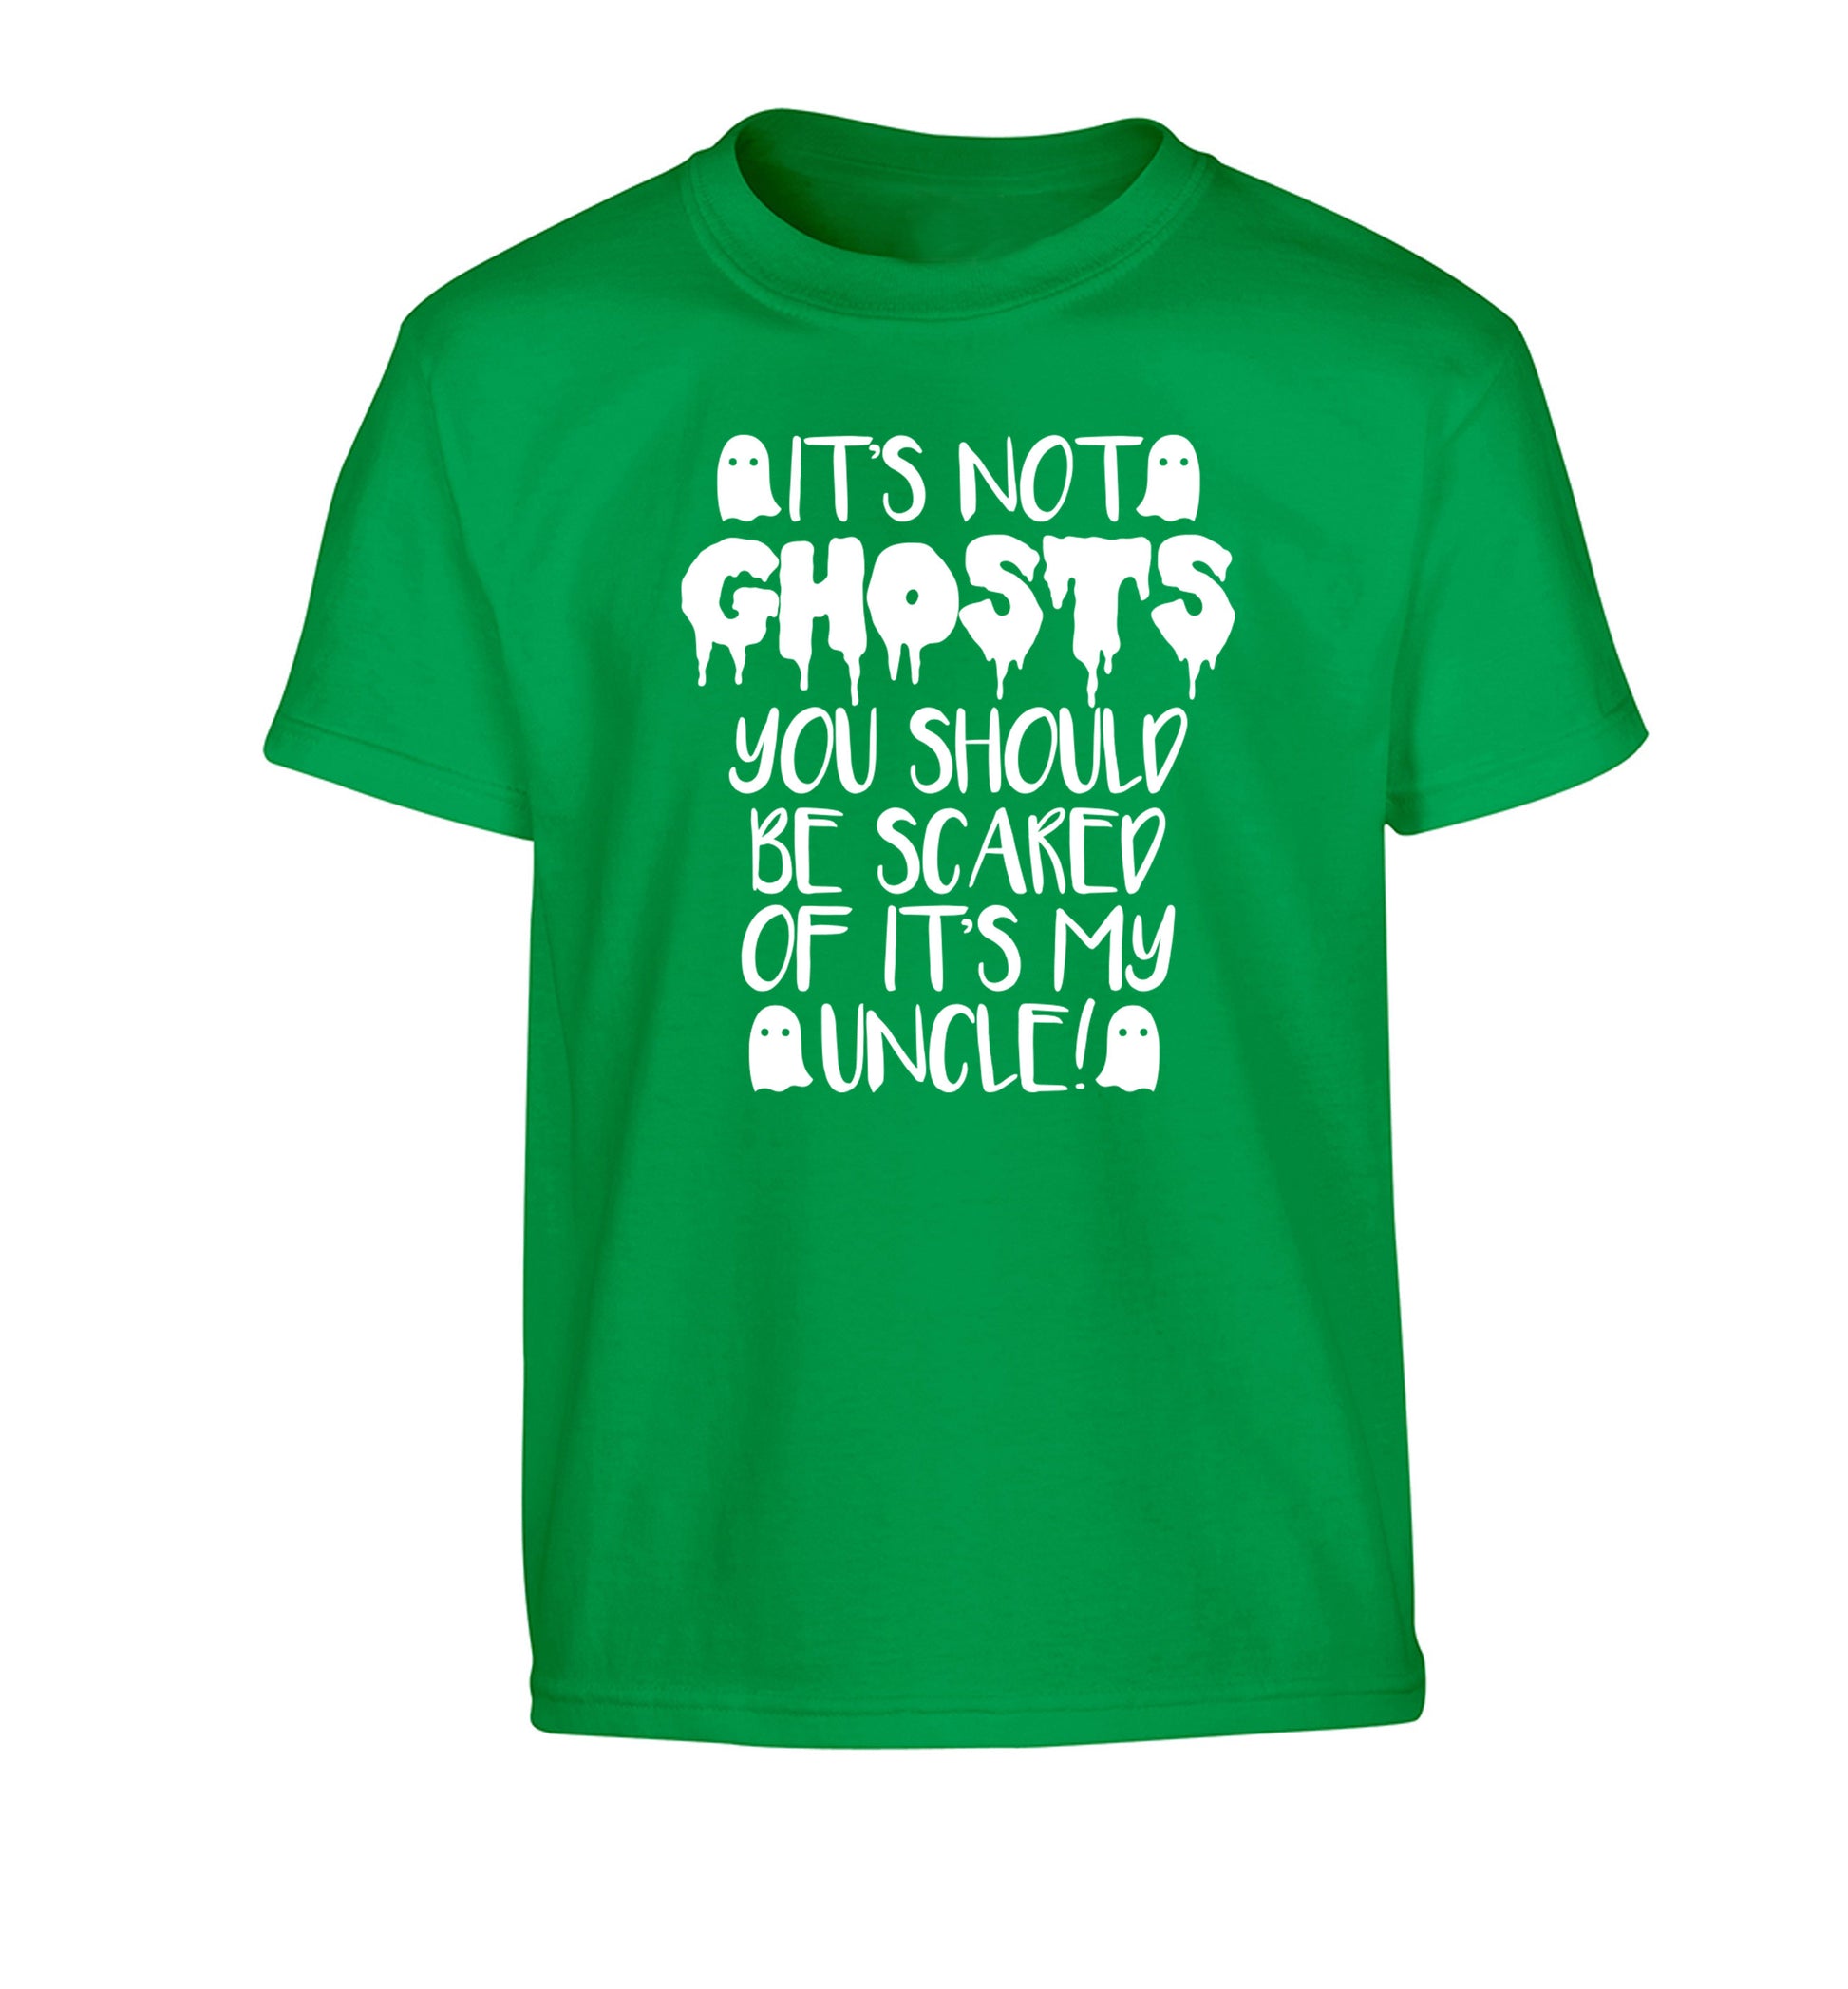 It's not ghosts you should be scared of it's my uncle! Children's green Tshirt 12-14 Years